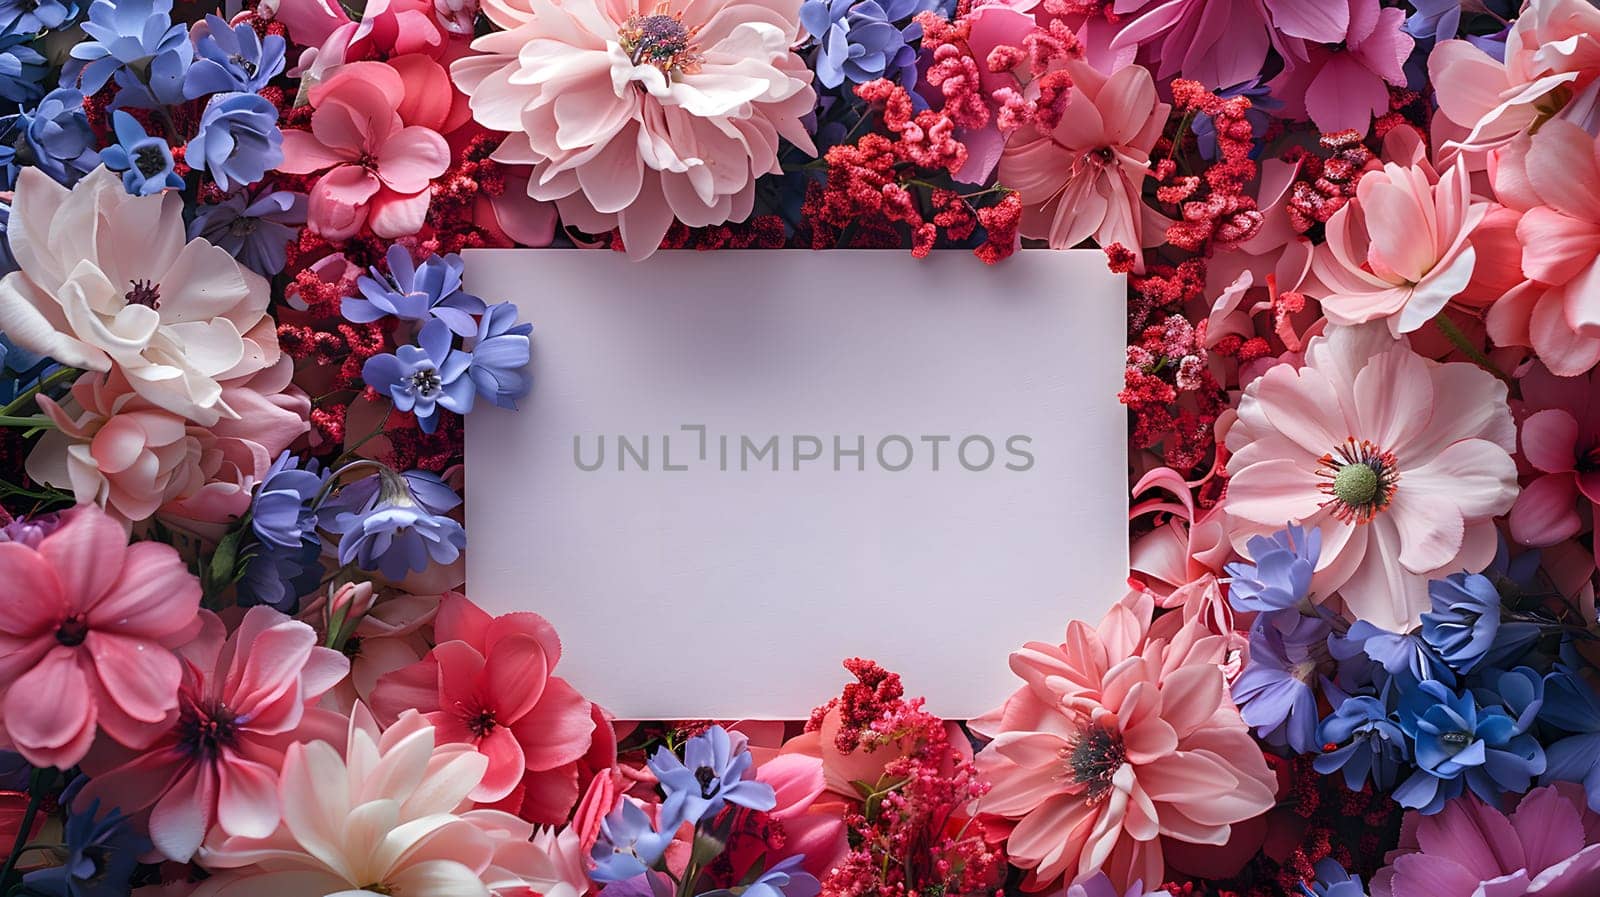 A white card is adorned with a delicate arrangement of pink and blue flowers, showcasing the beauty of nature and creative arts through the use of petals and leaves in shades of pink and magenta